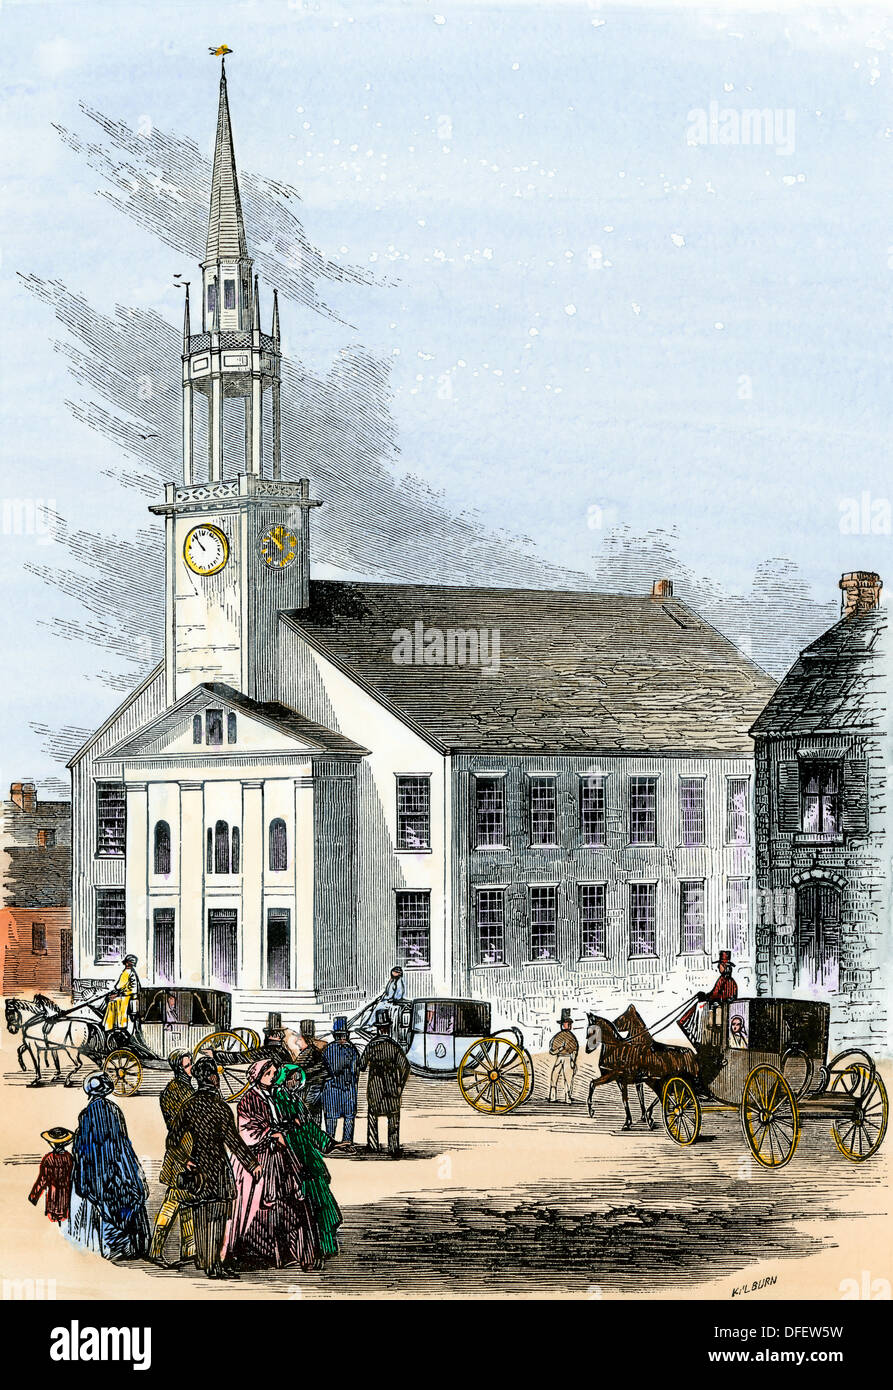 Carriages on the street by Old South Church in Newburyport, Massachusetts, 1850s. Hand-colored woodcut Stock Photo